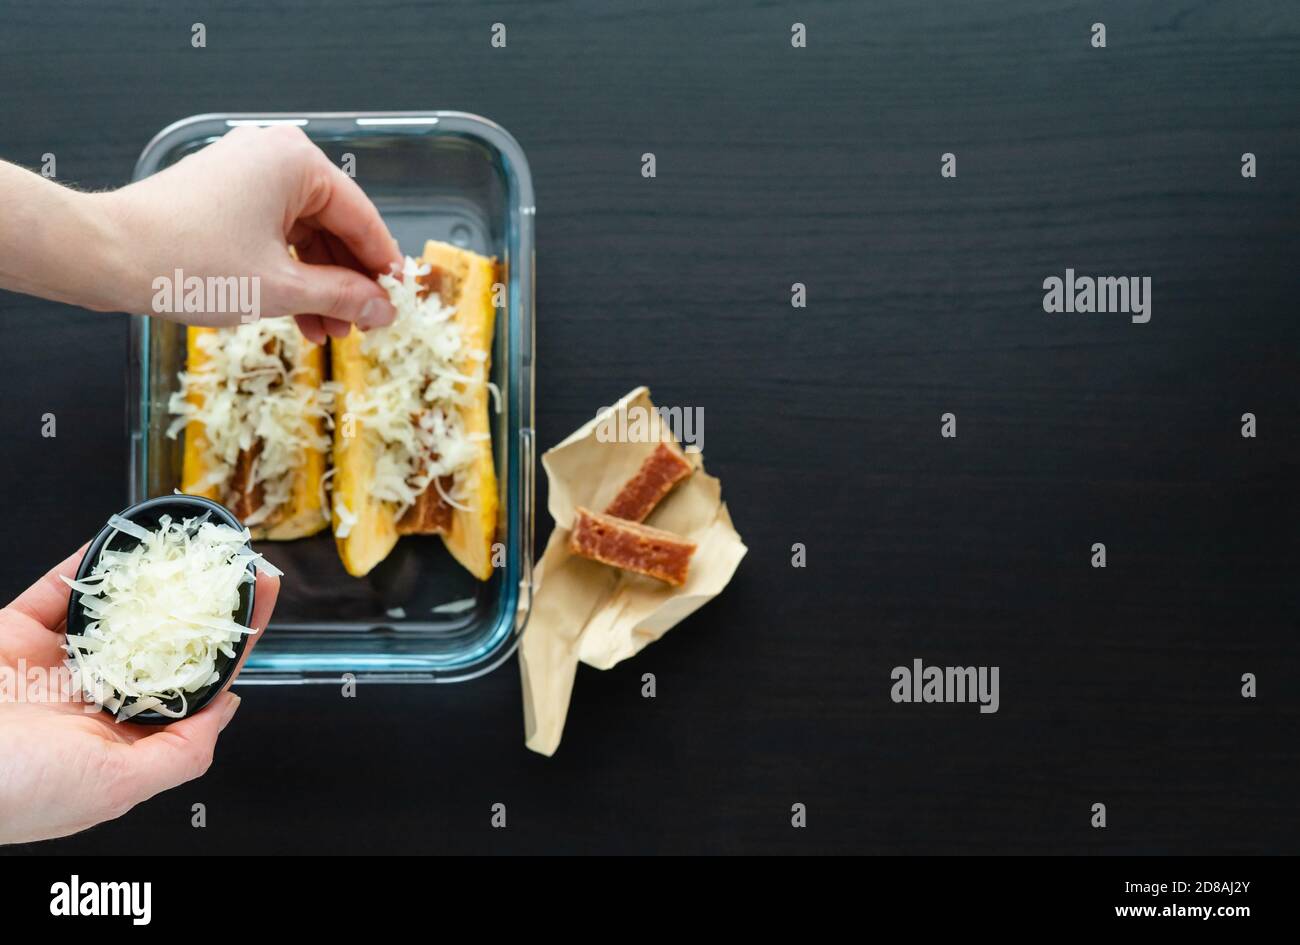 Hand putting cheese to cook Ripe banana in the oven with guava and cheese sandwich on a black wooden base. Typical Colombian food concept. Copy space. Stock Photo